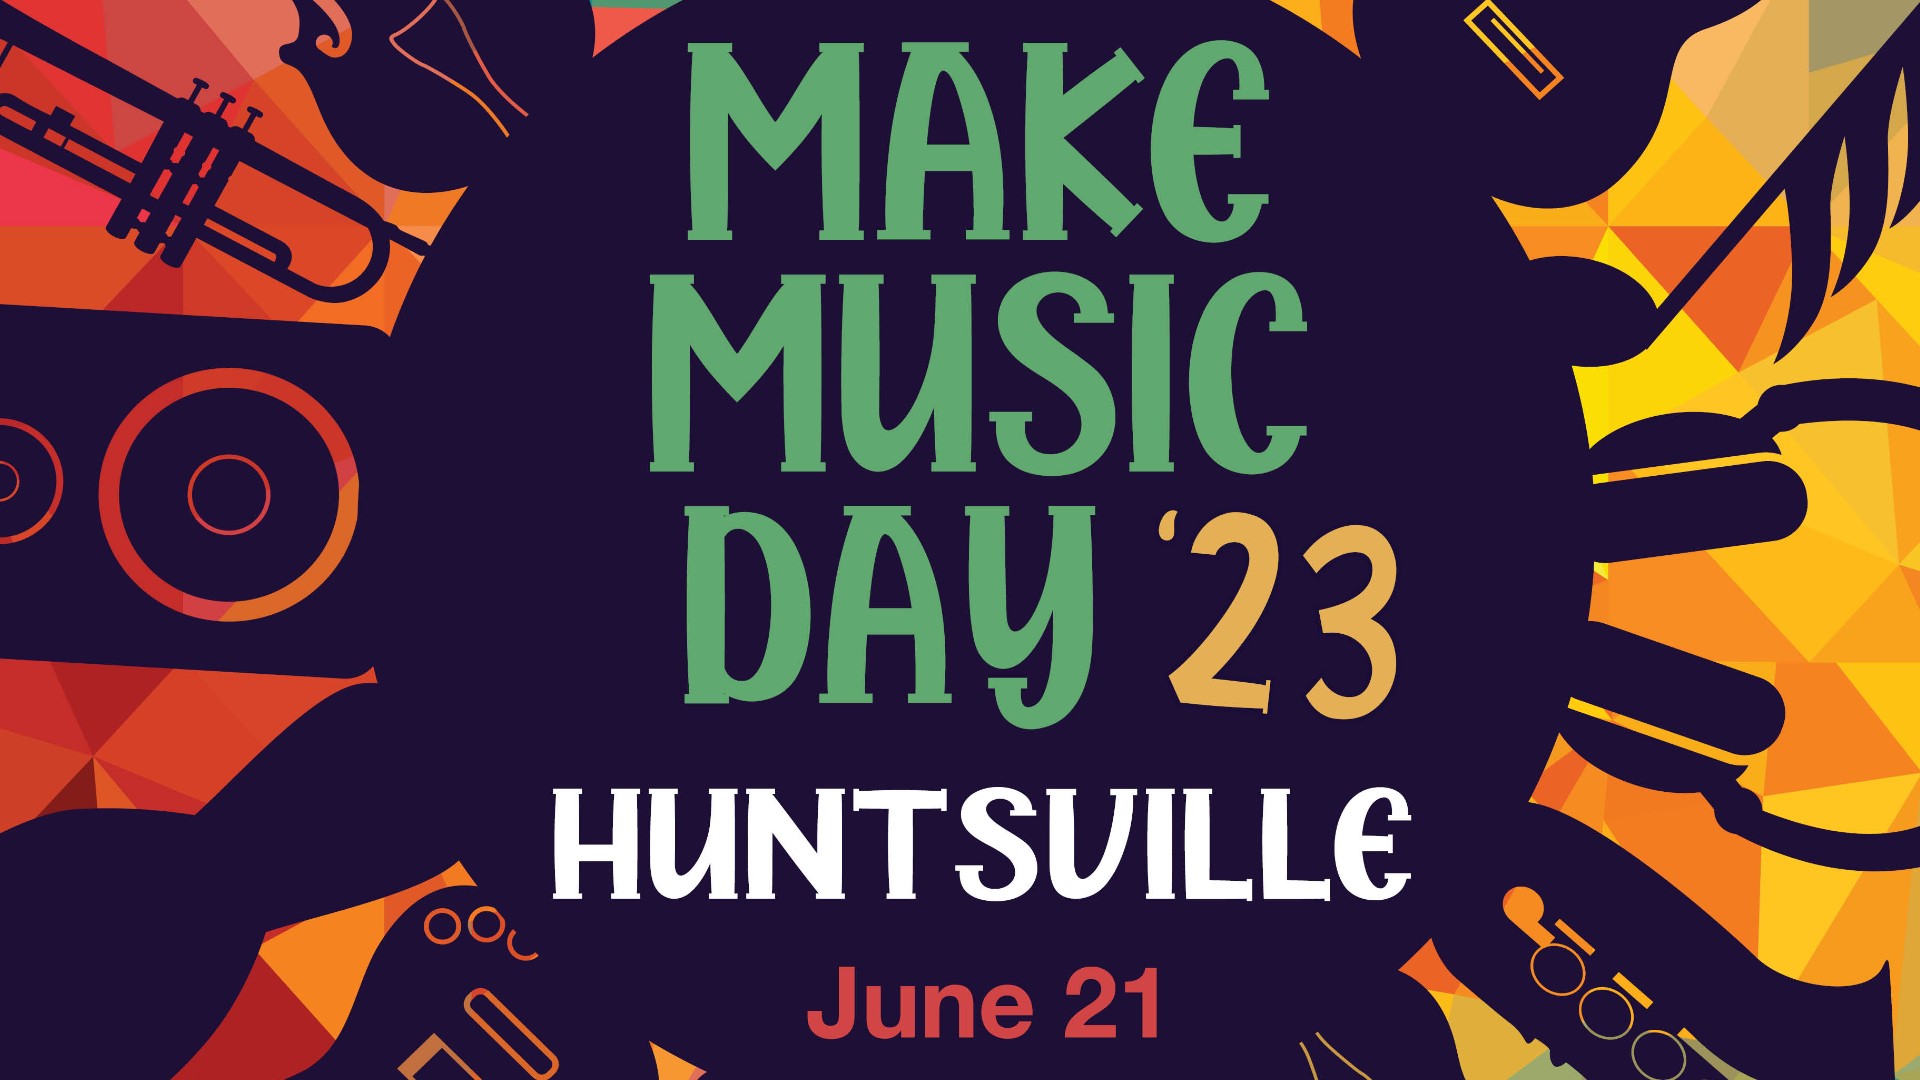 Huntsville turned into Concert City with free shows across the city for Make Music Day.